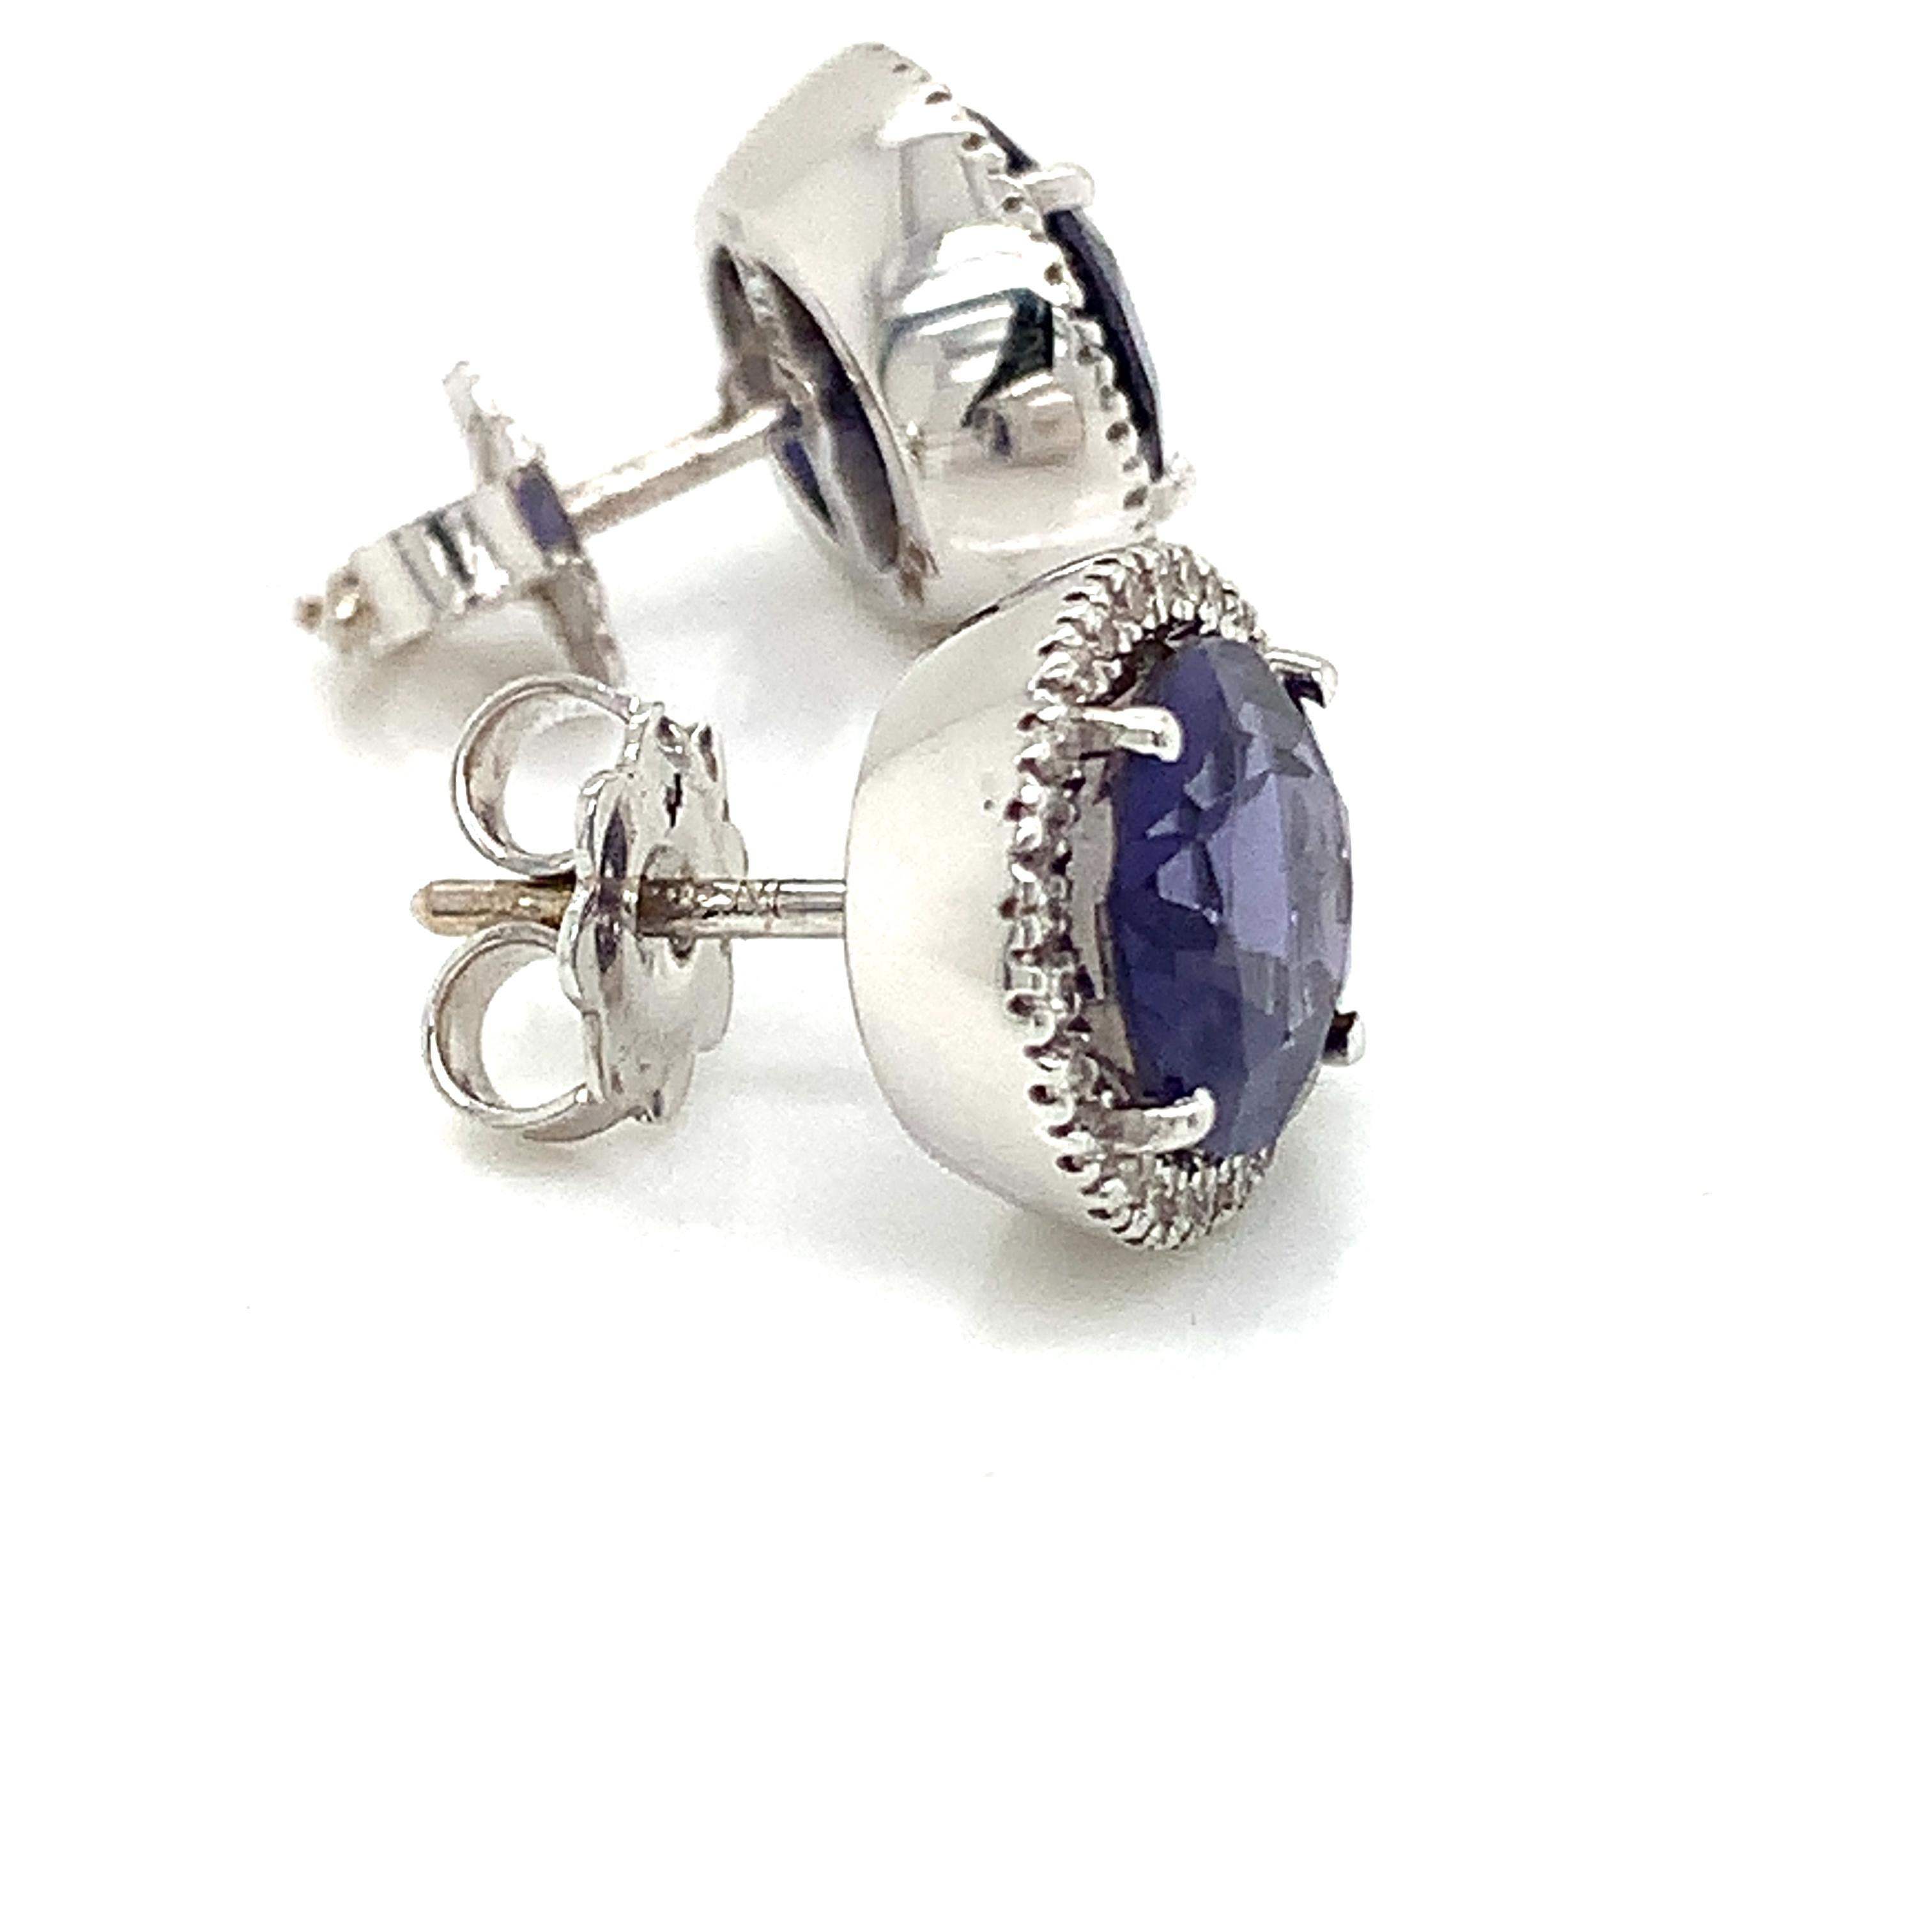 18 Kt White Gold Oval Shape Pair of stud earrings in Iolite and White Diamond by Garavelli  :
Discover timeless elegance with the 18 Kt White Gold Oval Shape earrings in Iolite and White Diamond by Garavelli, a masterpiece of jewelry